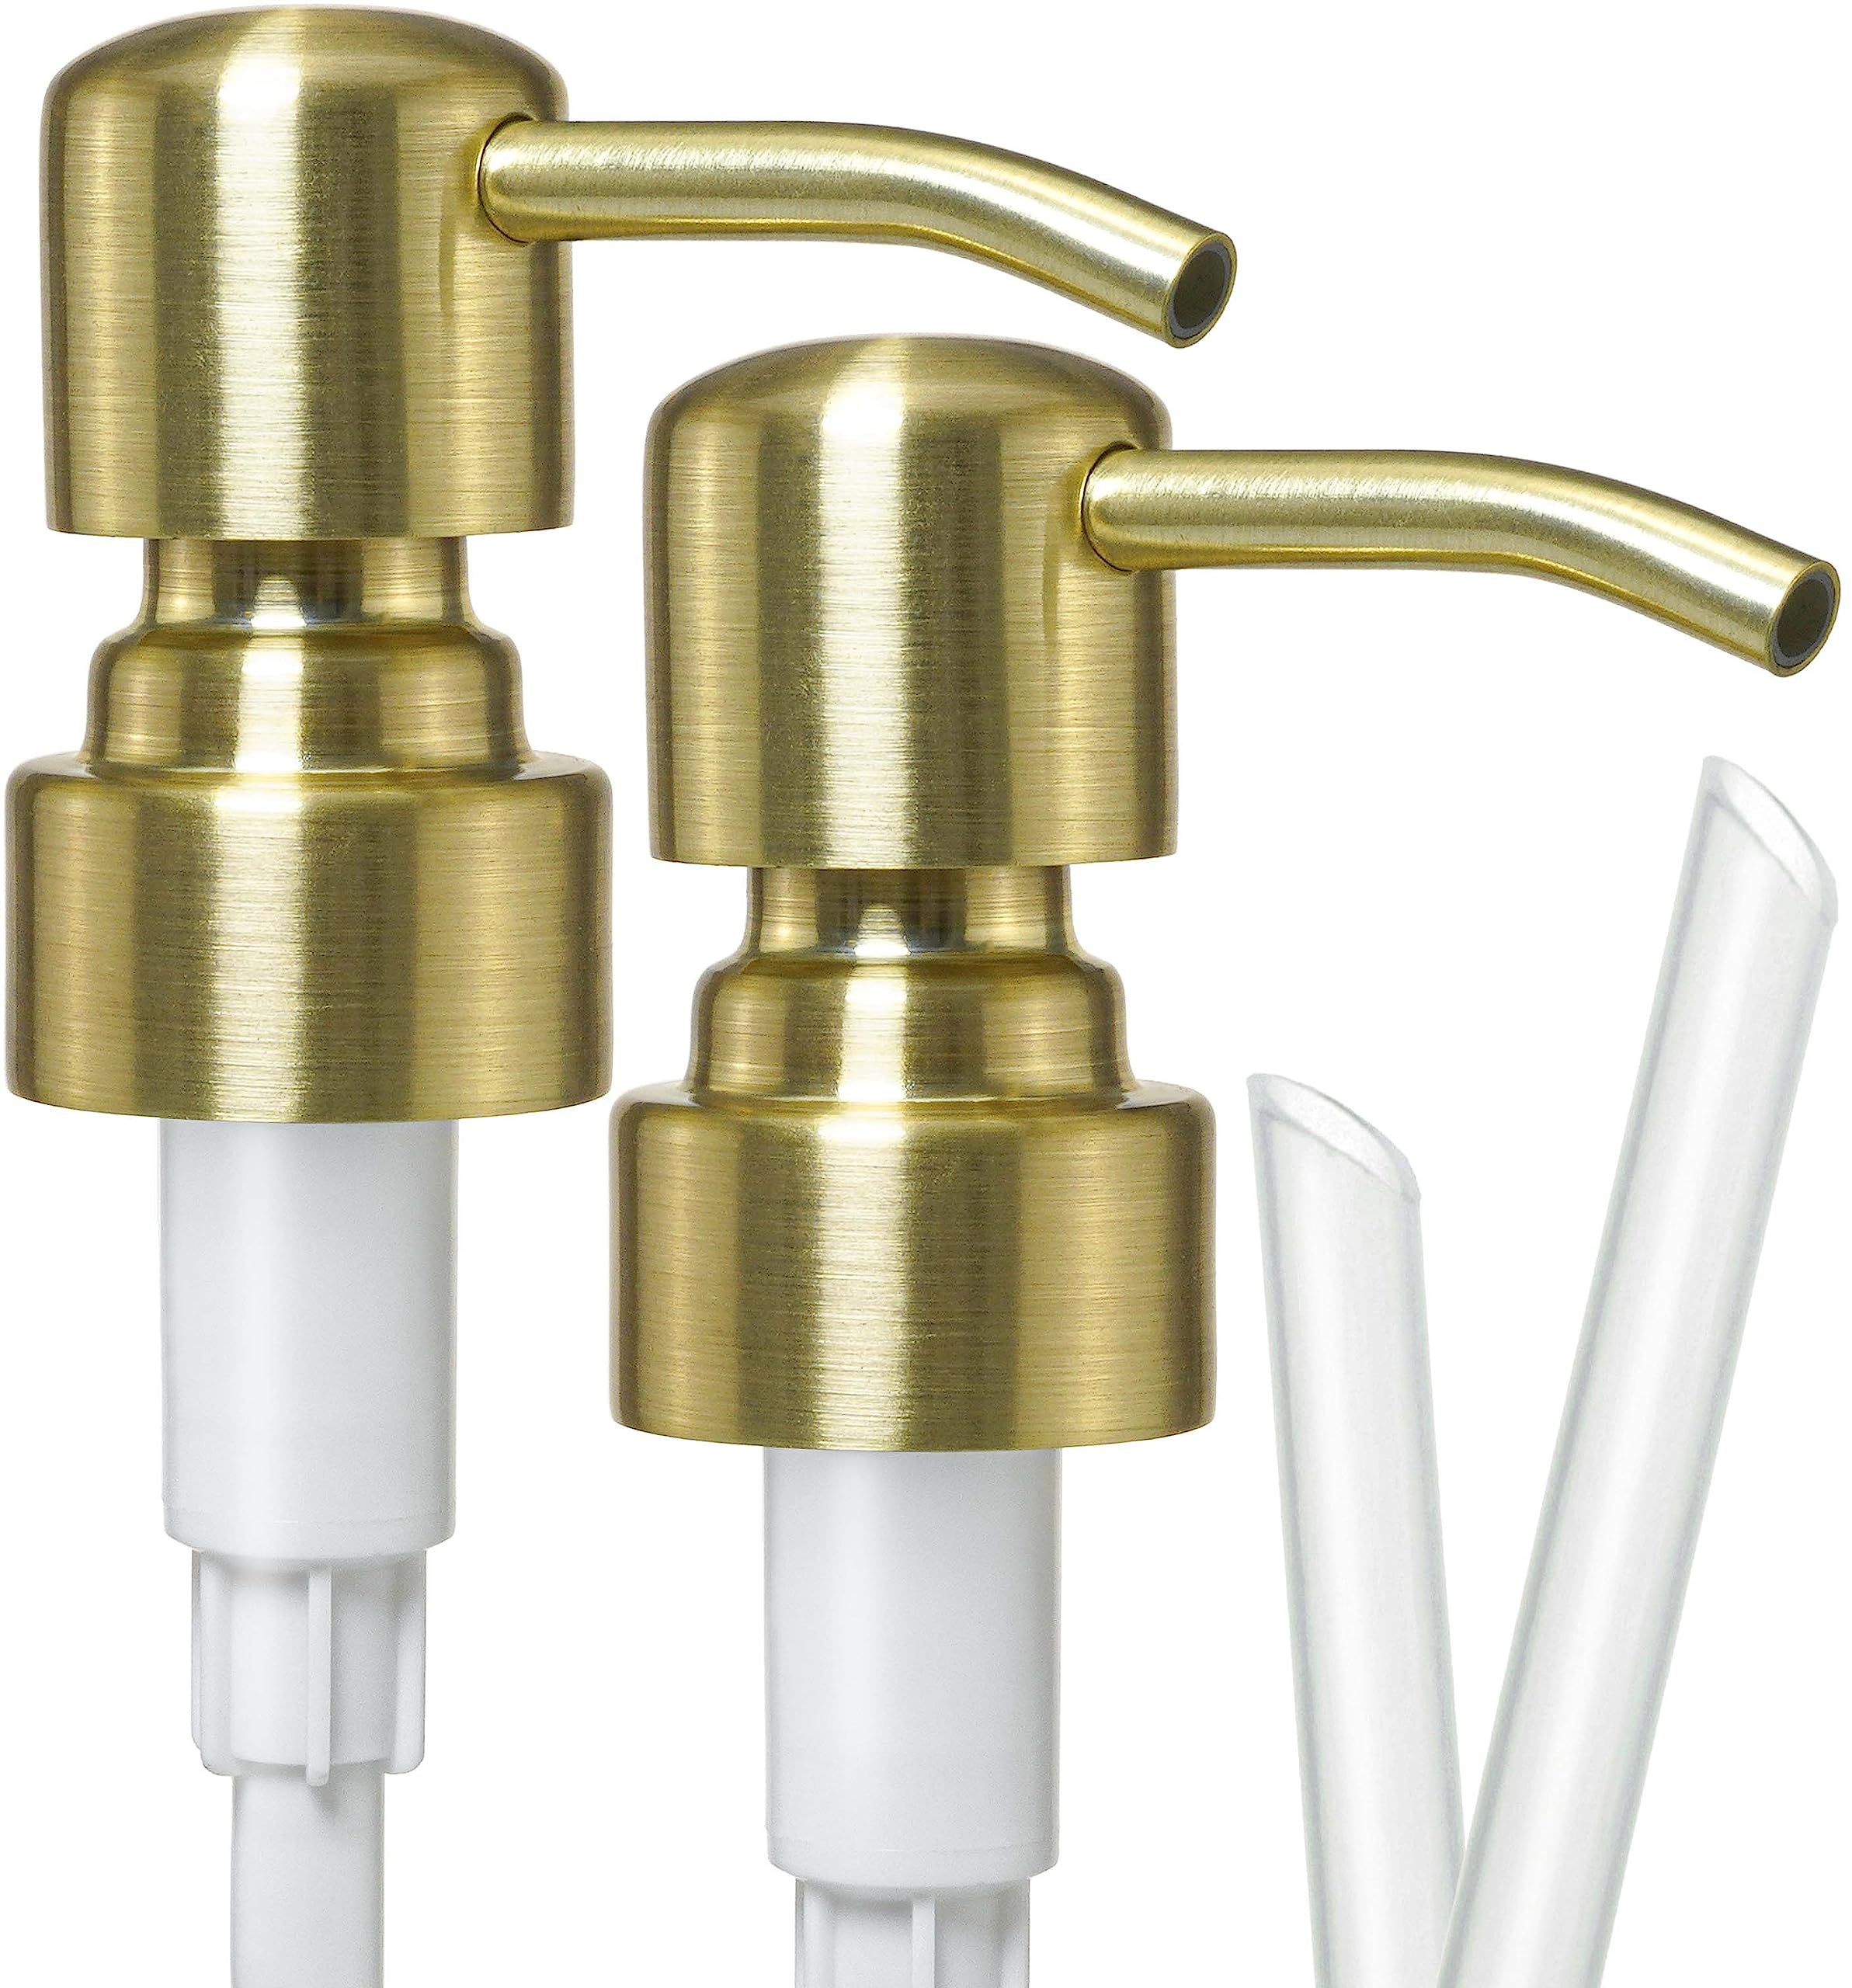 Amazon.com: JASAI 2 Pack Royal Golded Soap Pump Replacement for ...